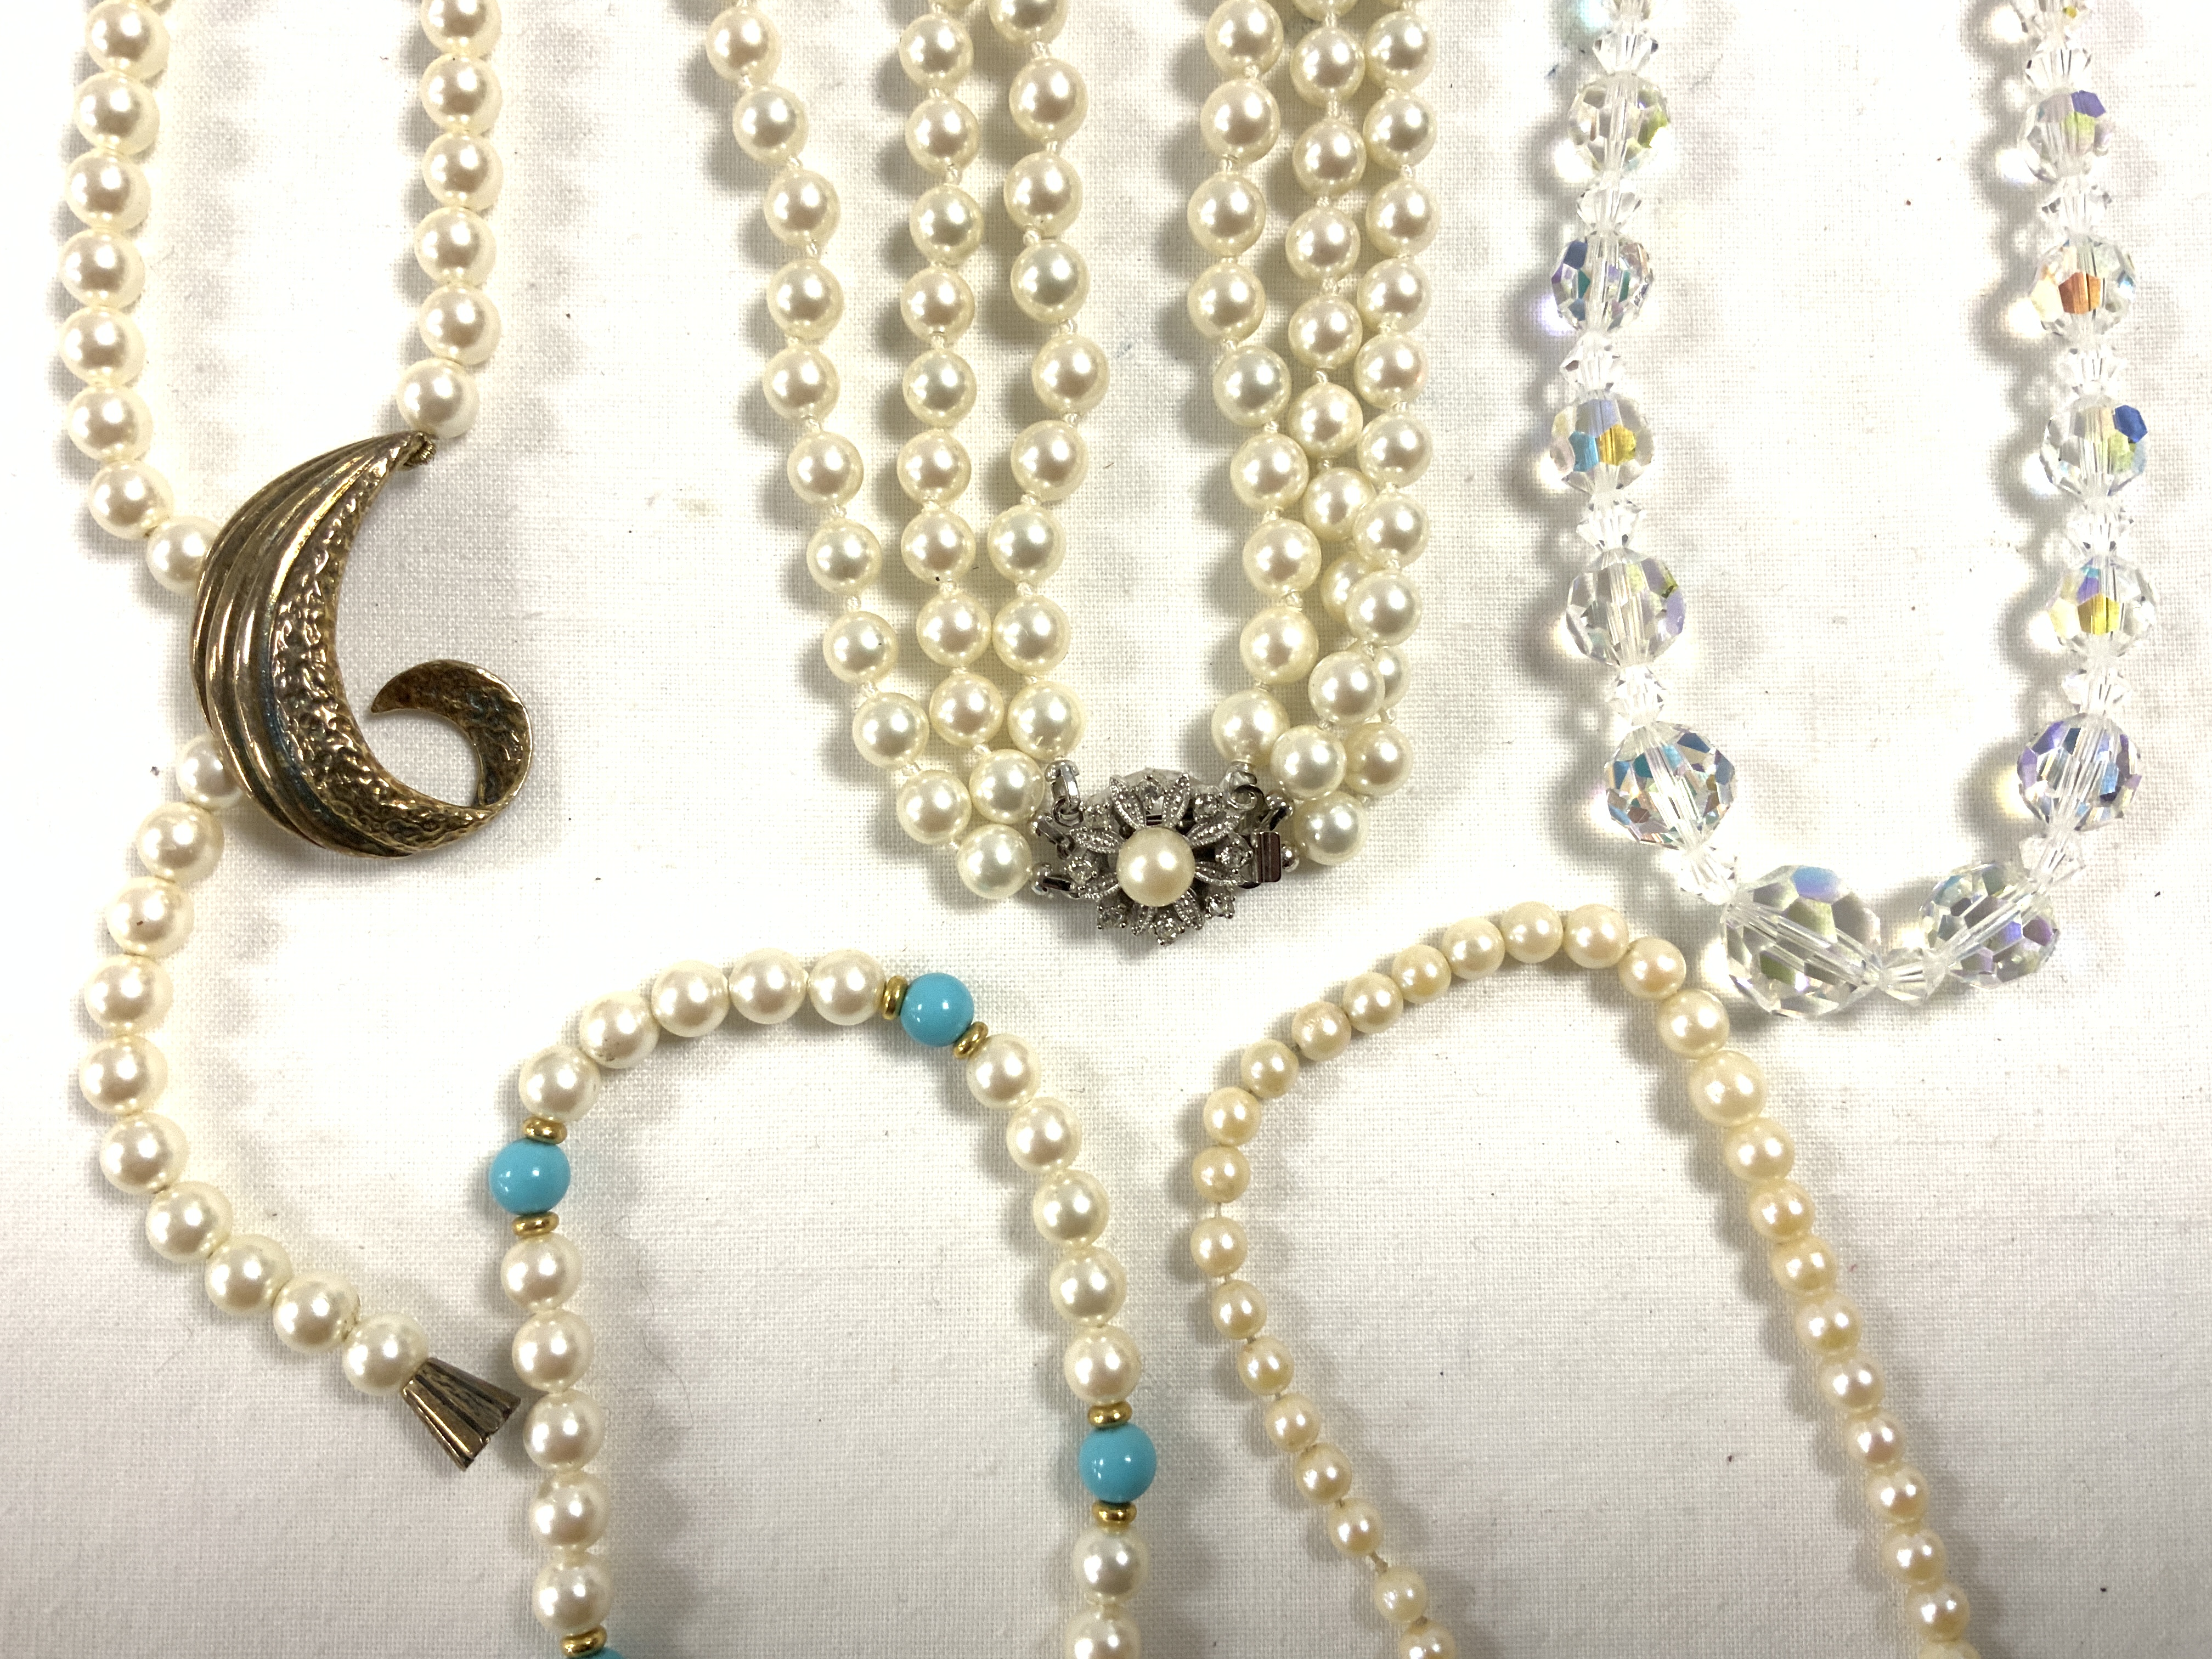 MIXED VINTAGE PEARL NECKLACES SOME WITH SILVER CLASP AND MORE - Image 3 of 5